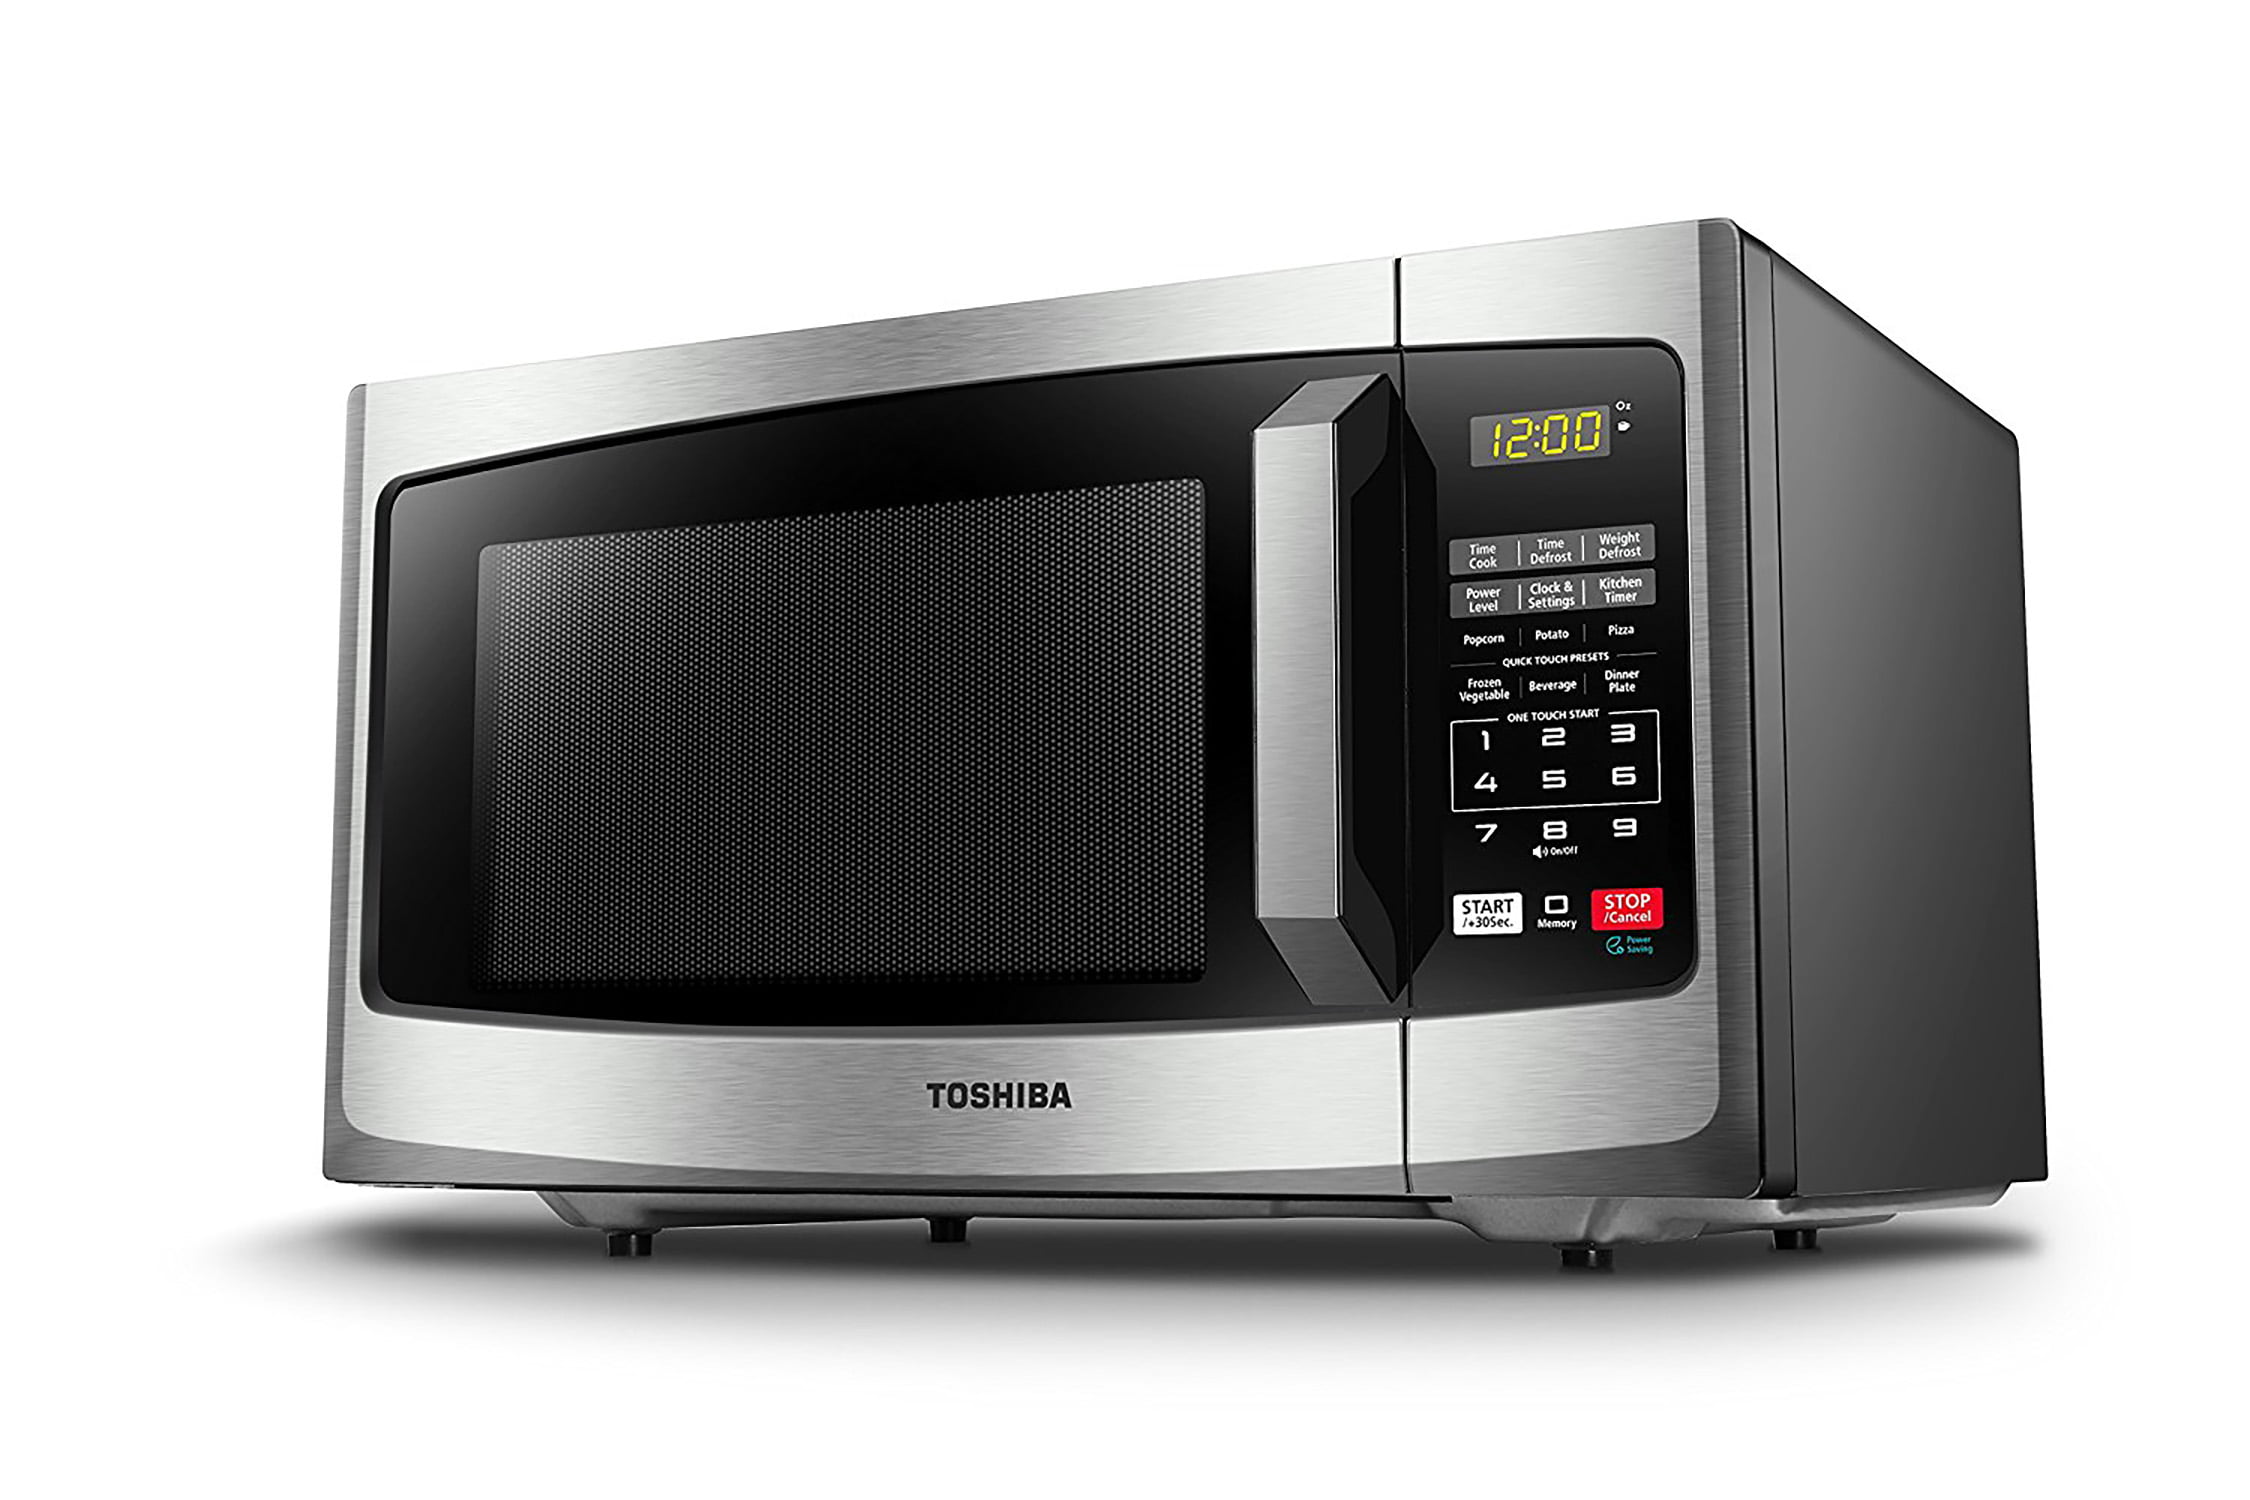 Toshiba 1.2 Cu. ft. Black Stainless Steel Microwave with Smart Sensor